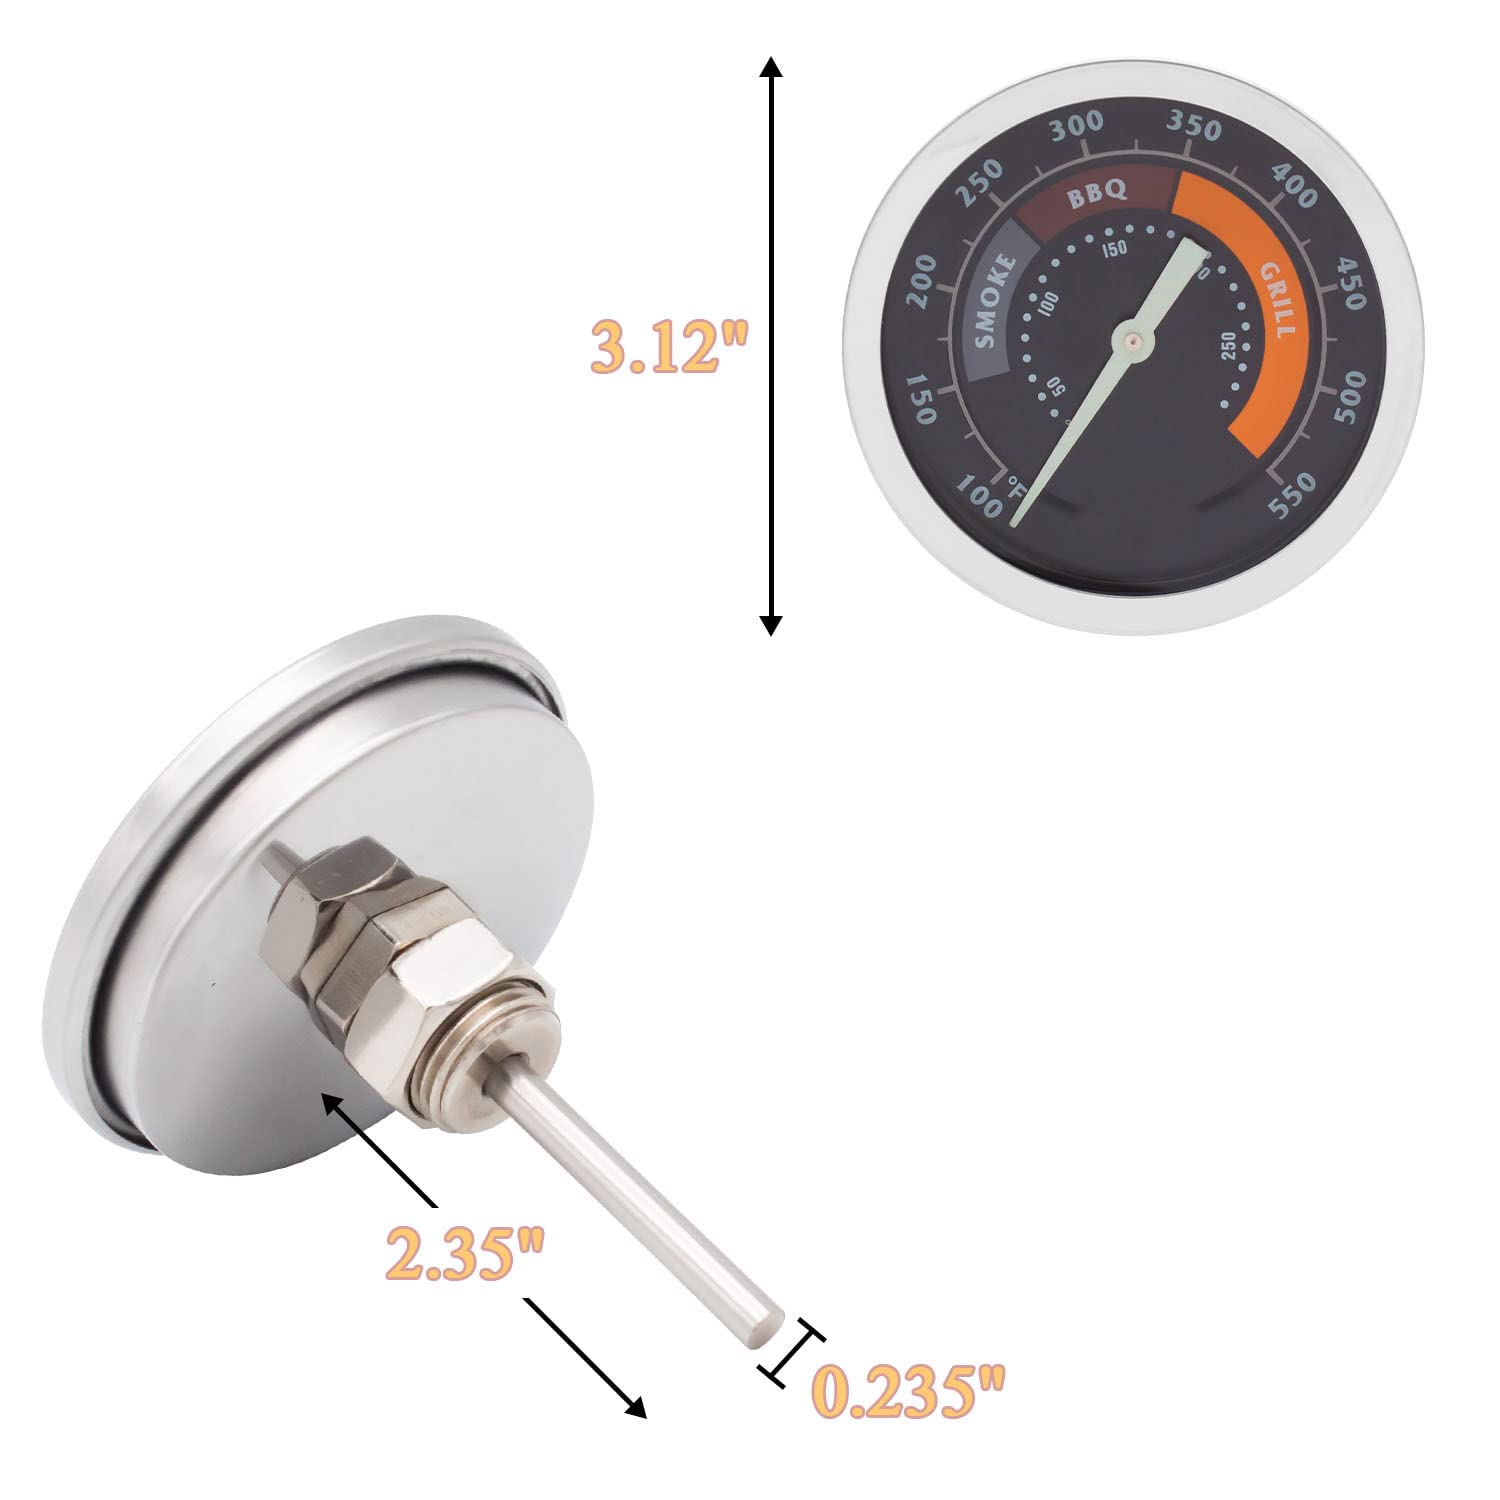 Grill Dome Temperature Gauge Thermometer for Oklahoma Joe's